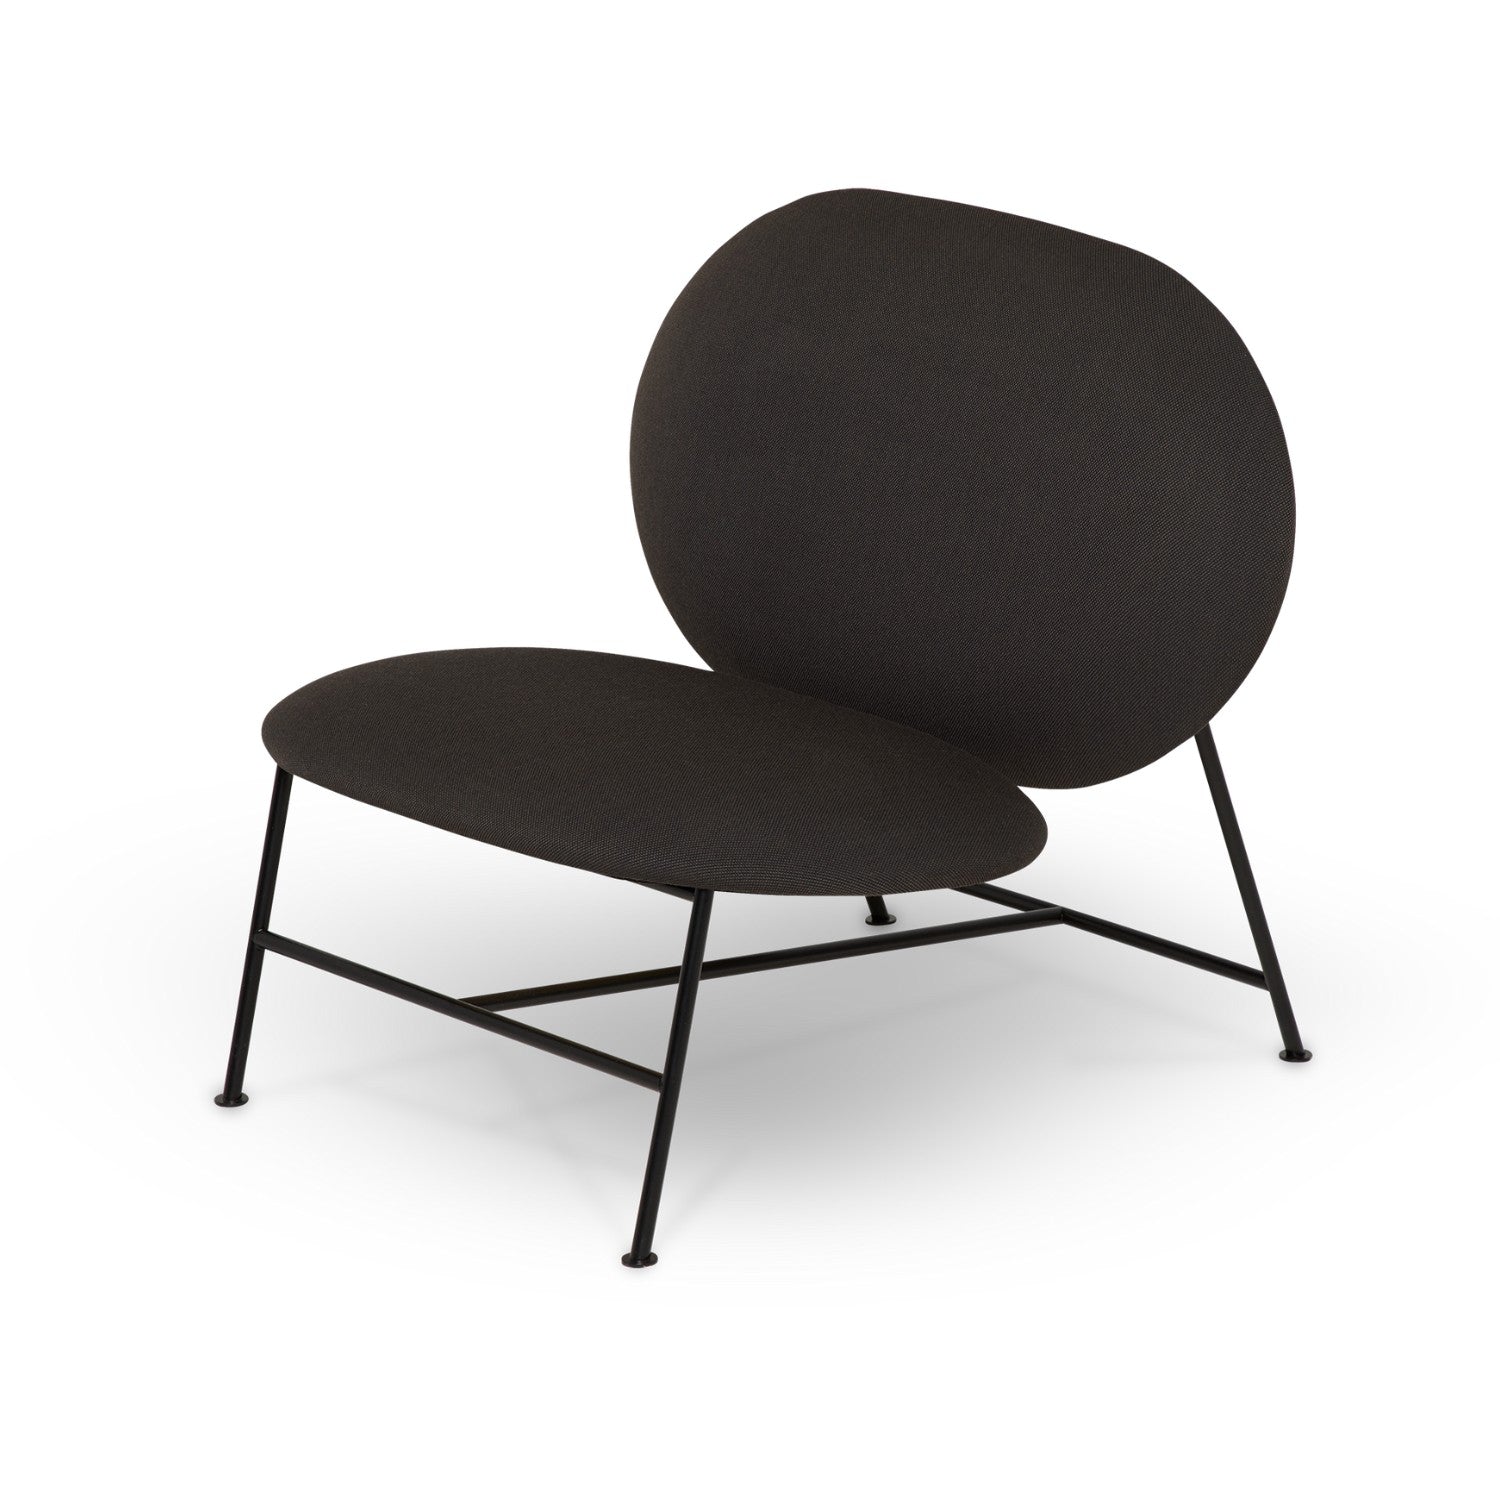 OBLONG - Lounge Chair